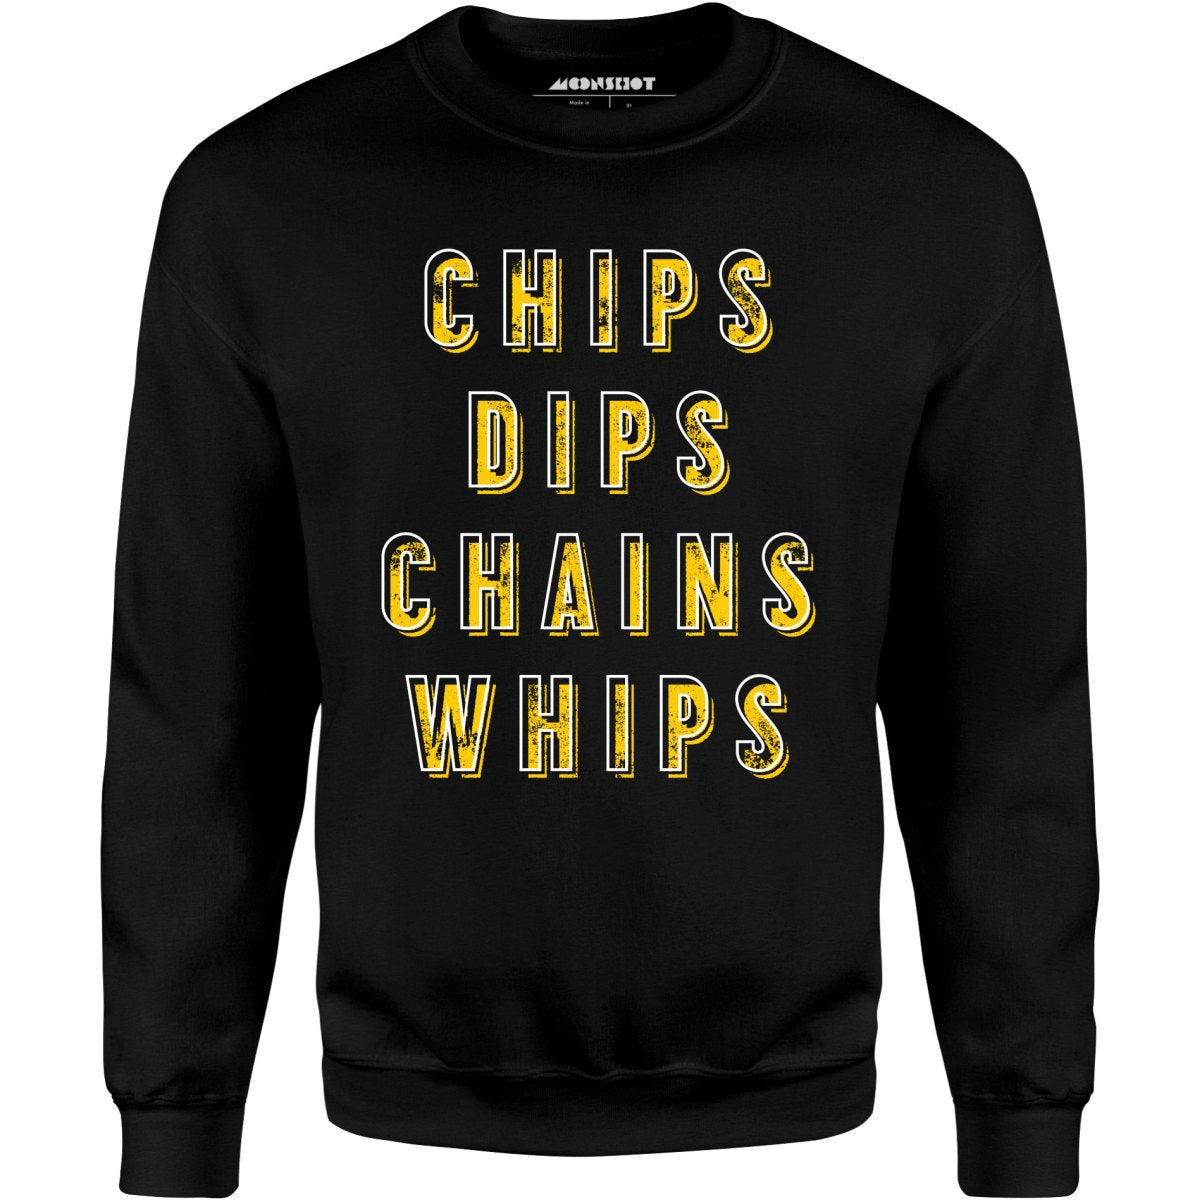 Chips Dips Chains Whips - Unisex Sweatshirt